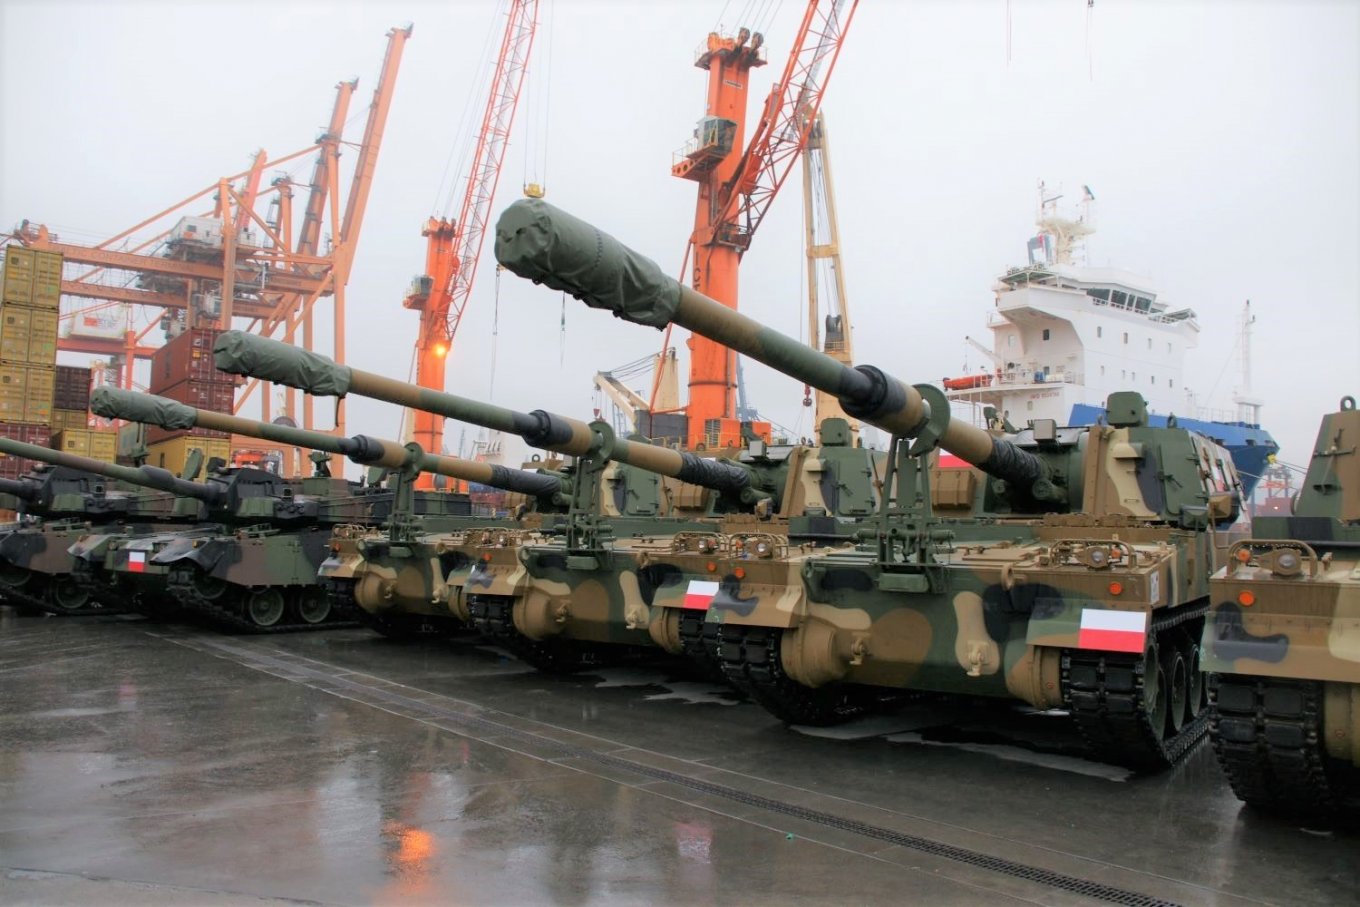 It Took Poland 102 Days to Get Korean K2 Tanks And K9 Self-Propelled Funs – of Them 35 Days Were Spent On the Road (Detailed Photos), Defense Express, war in Ukraine, Russian-Ukrainian war